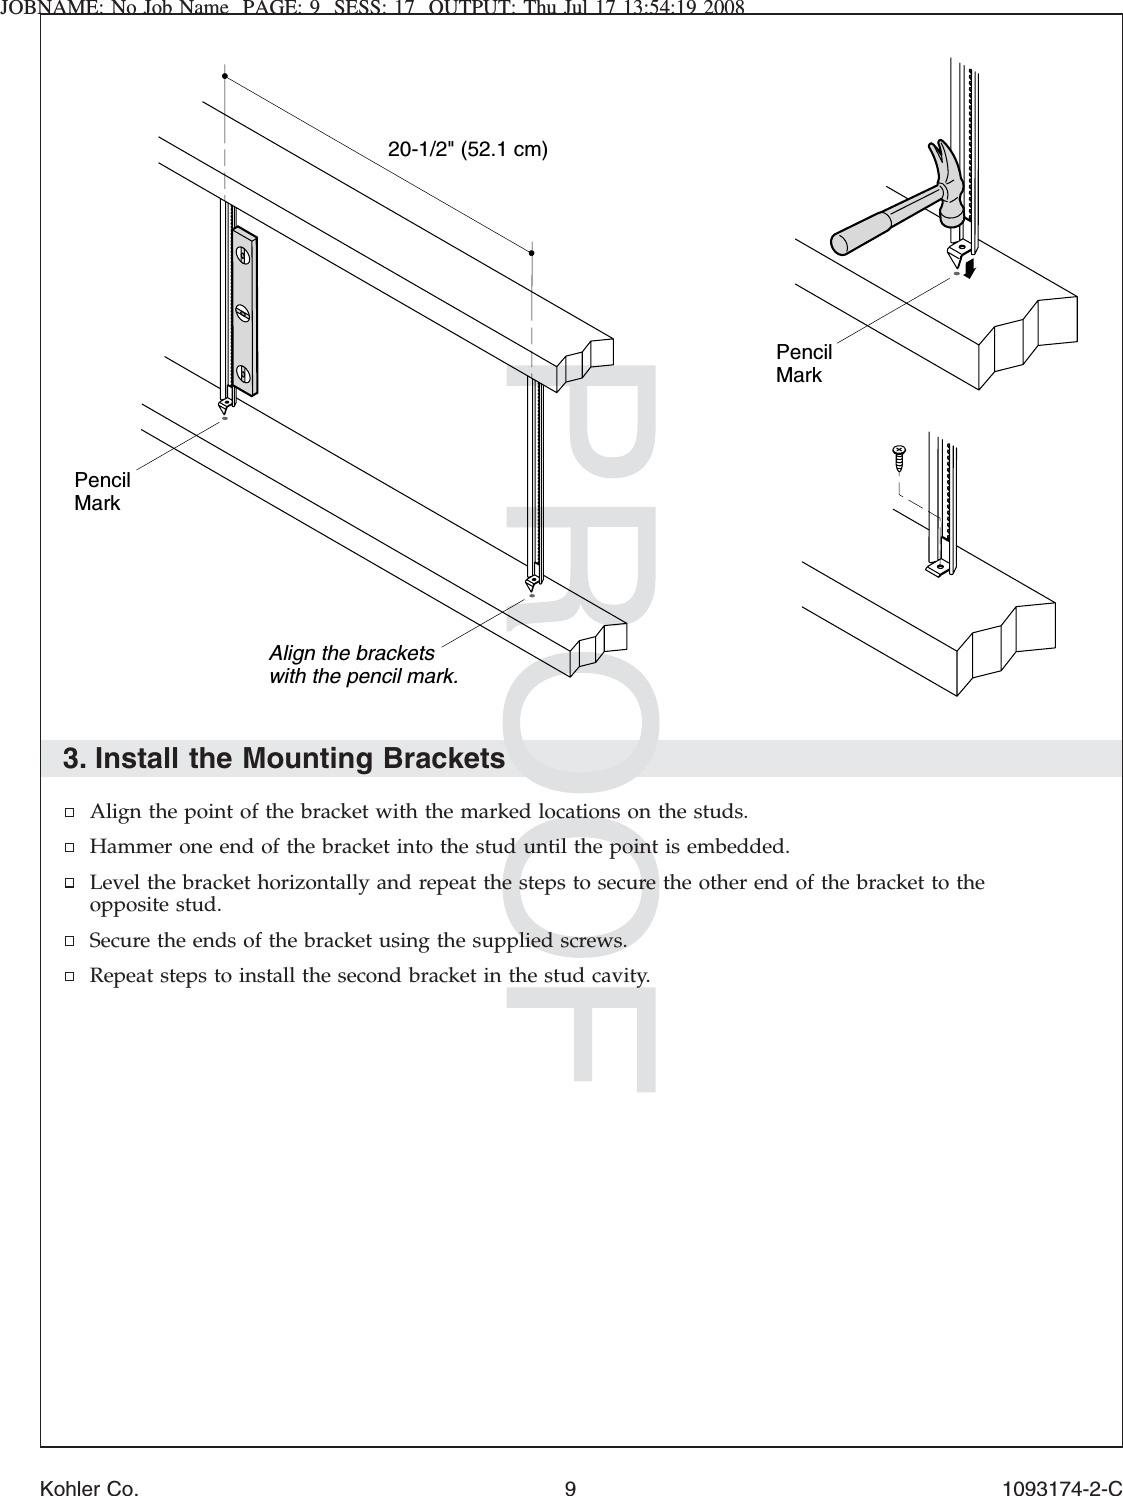 JOBNAME: No Job Name PAGE: 9 SESS: 17 OUTPUT: Thu Jul 17 13:54:19 20083. Install the Mounting BracketsAlign the point of the bracket with the marked locations on the studs.Hammer one end of the bracket into the stud until the point is embedded.Level the bracket horizontally and repeat the steps to secure the other end of the bracket to theopposite stud.Secure the ends of the bracket using the supplied screws.Repeat steps to install the second bracket in the stud cavity.20-1/2&quot; (52.1 cm)Align the brackets with the pencil mark.PencilMarkPencil MarkKohler Co. 9 1093174-2-C